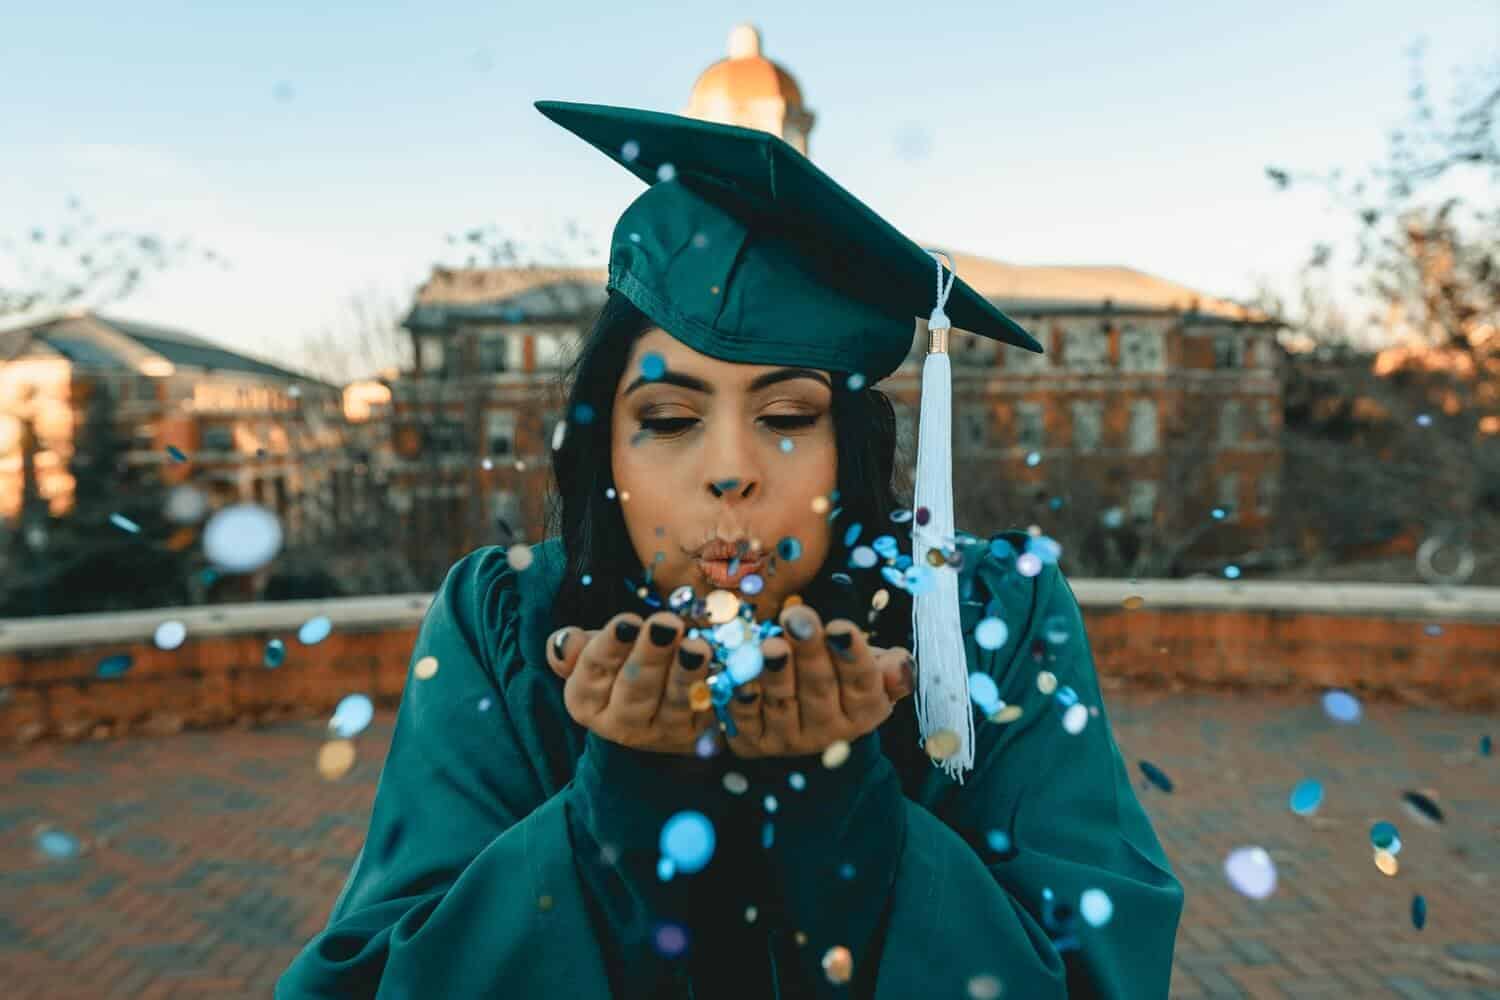 Image of a lady in a graduation gown blowing a kiss as a sign of celebration. Obviously, her college admission essay must have been accepted during her application to the school for her to be able to graduate.